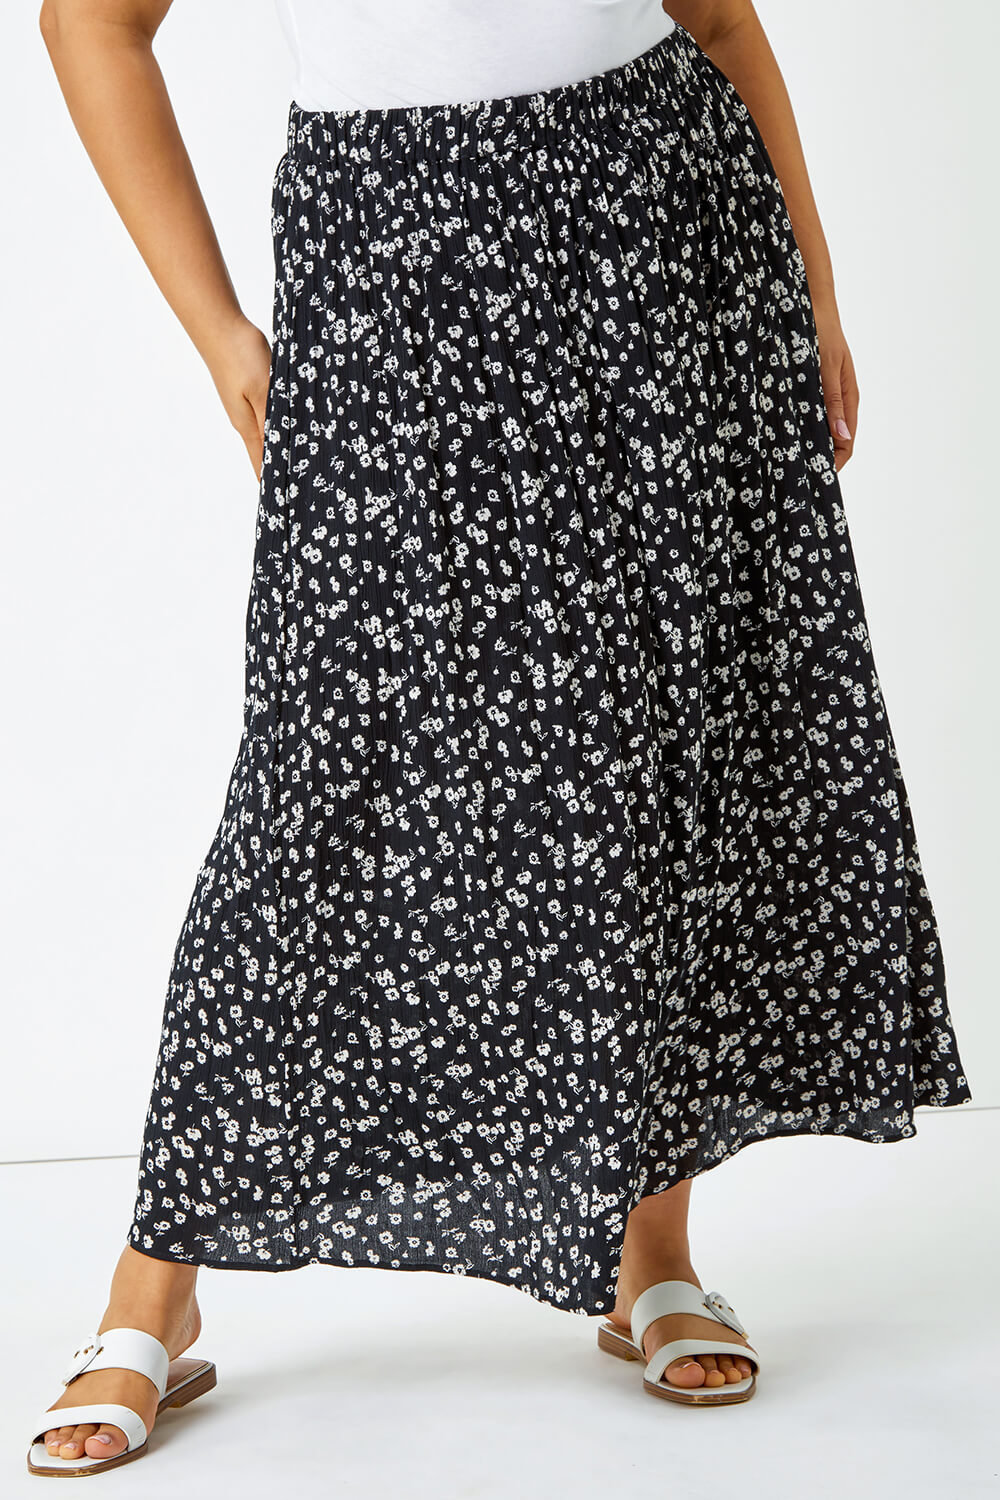 Black Curve Ditsy Floral Maxi Skirt, Image 4 of 5